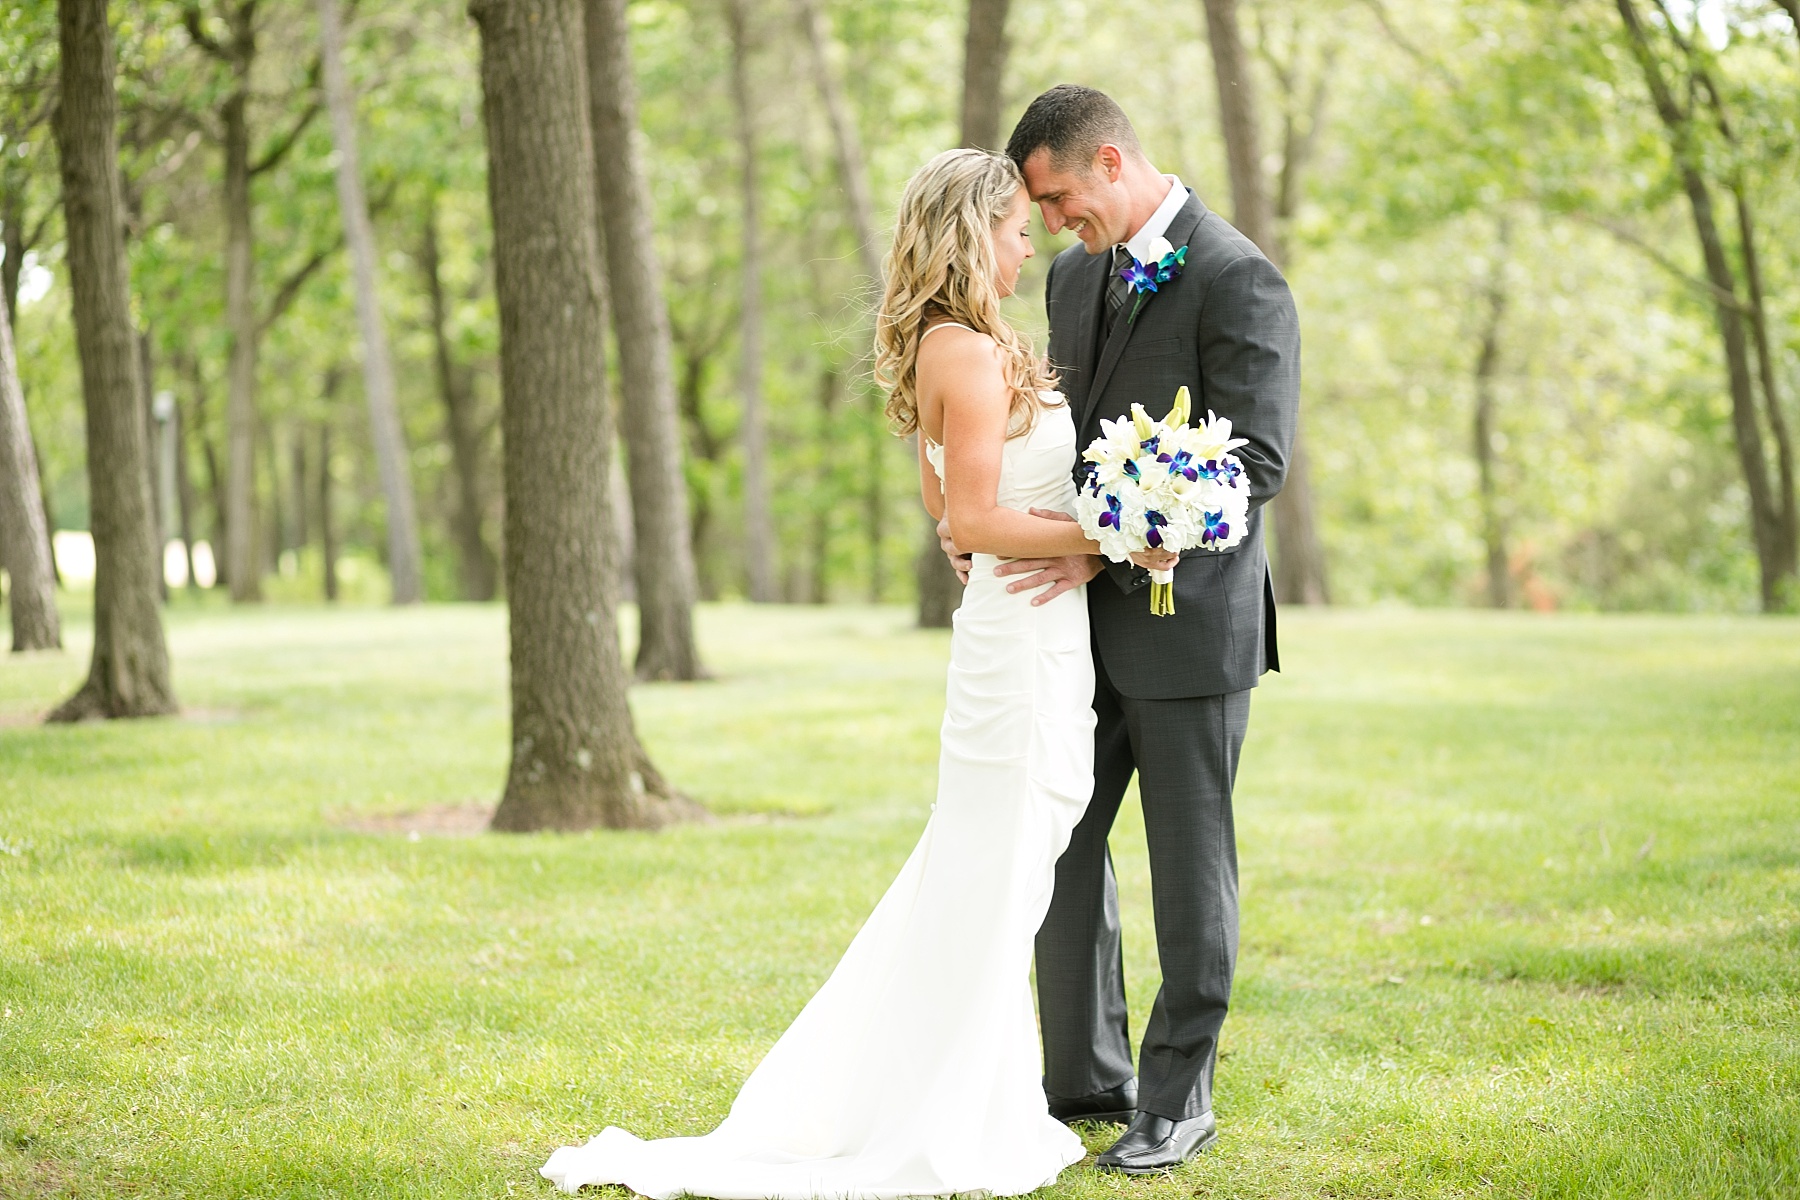 They met in the break room at work, and it was love at first sight for Brittany & Jim.  